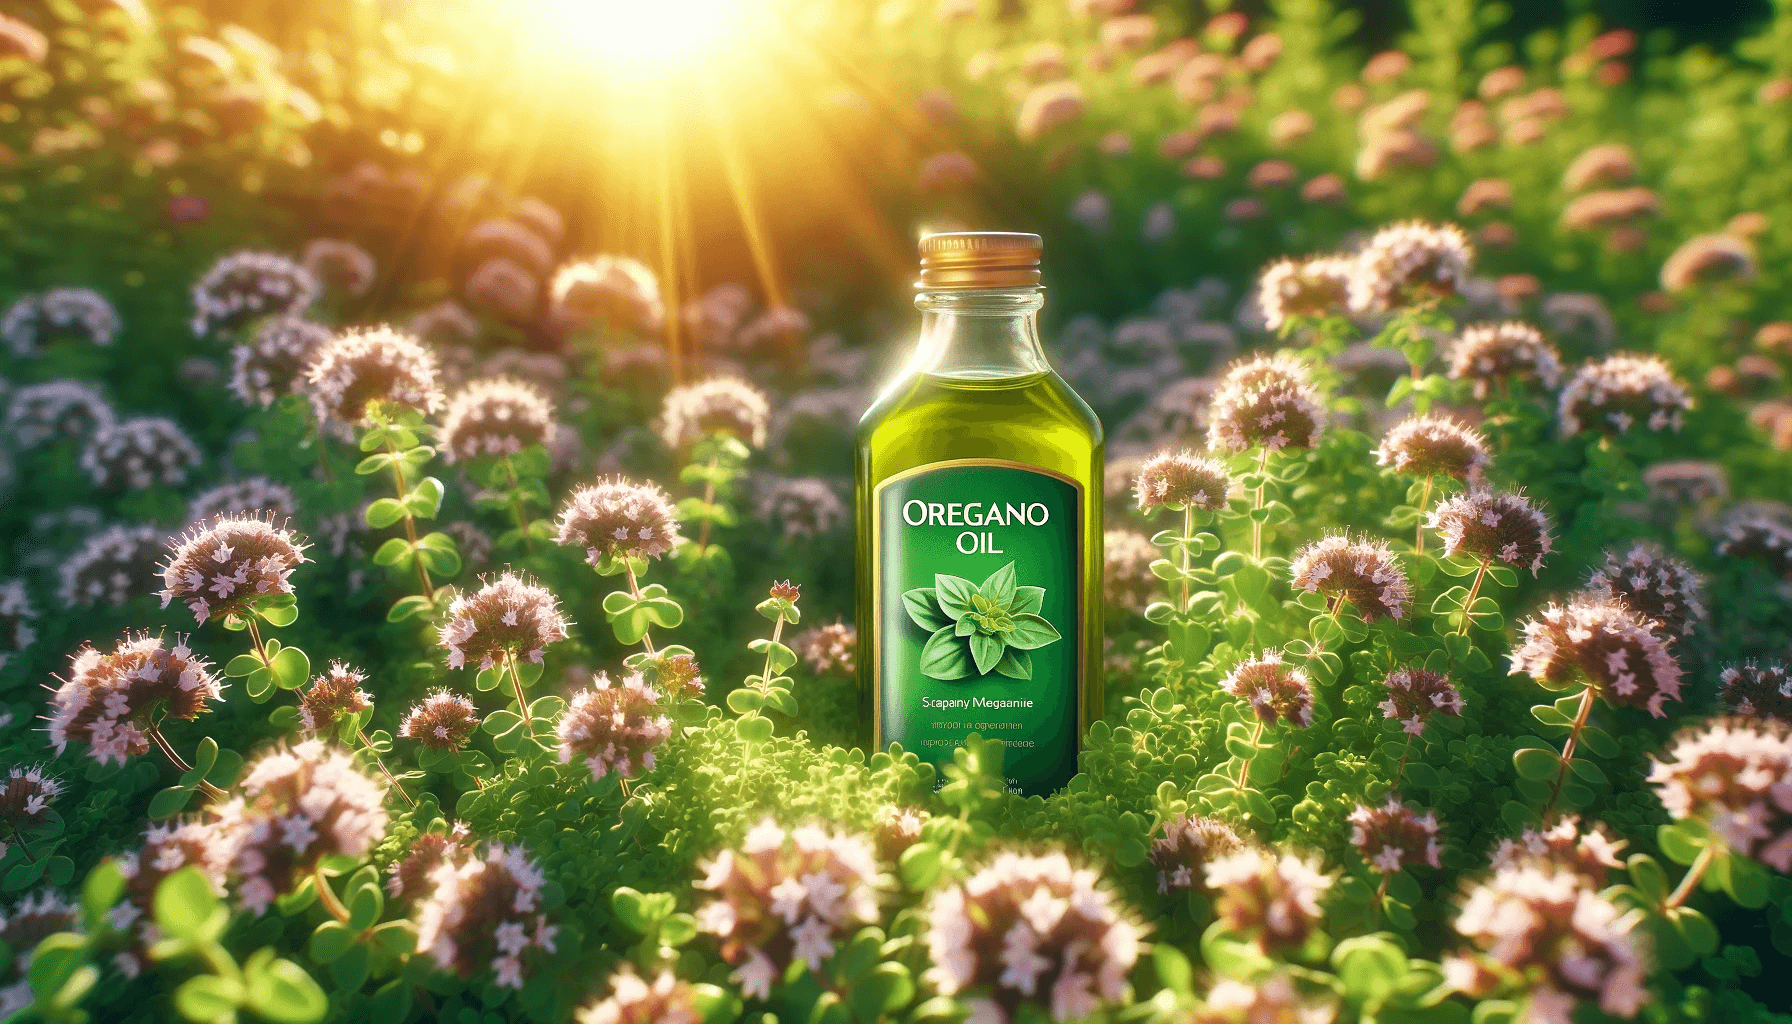 A bright sunny image of an oregano oil bottle with a vibrant green label placed in a field of flowering oregano plants, highlighting the natural source of the oil.